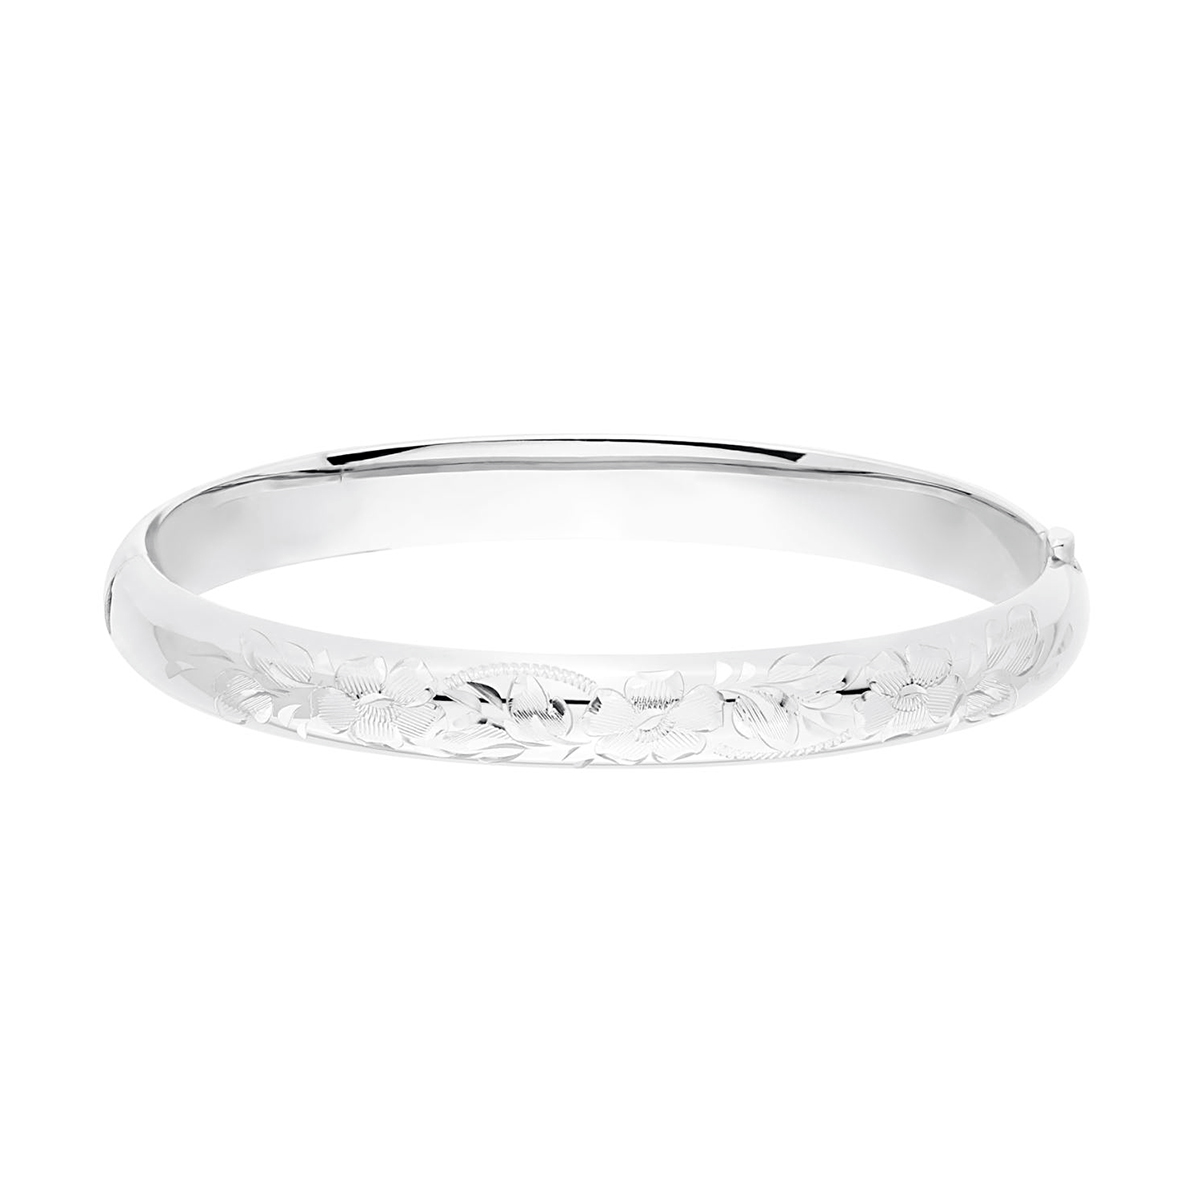 Sterling Silver Flower Engraved 7 Inch Bangle Bracelet With Push Button Guard & Hinge Clasp.